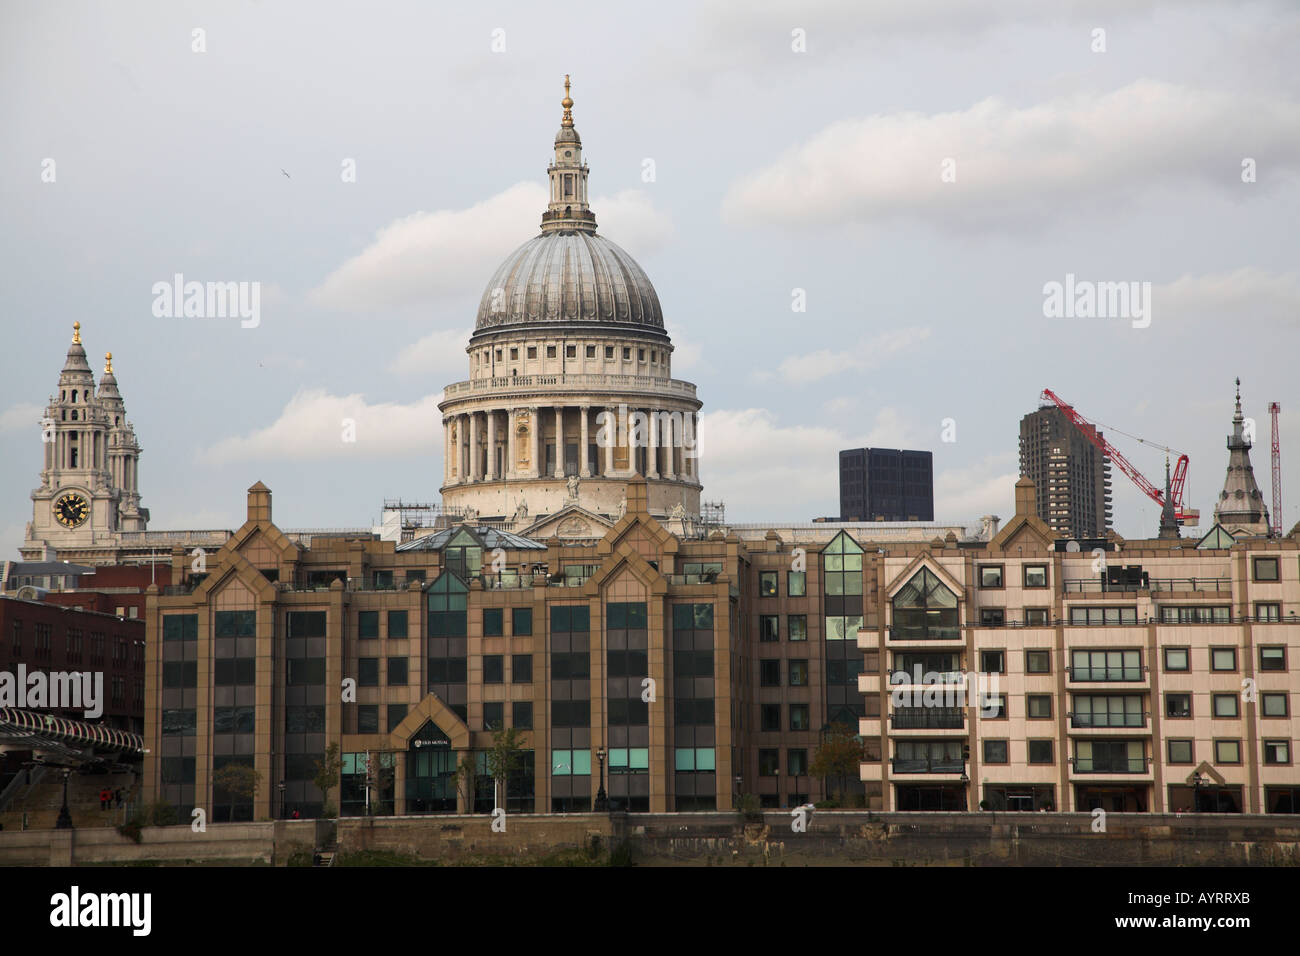 St Paul's cathedral and River Thames office buildings London England November 2006 Stock Photo